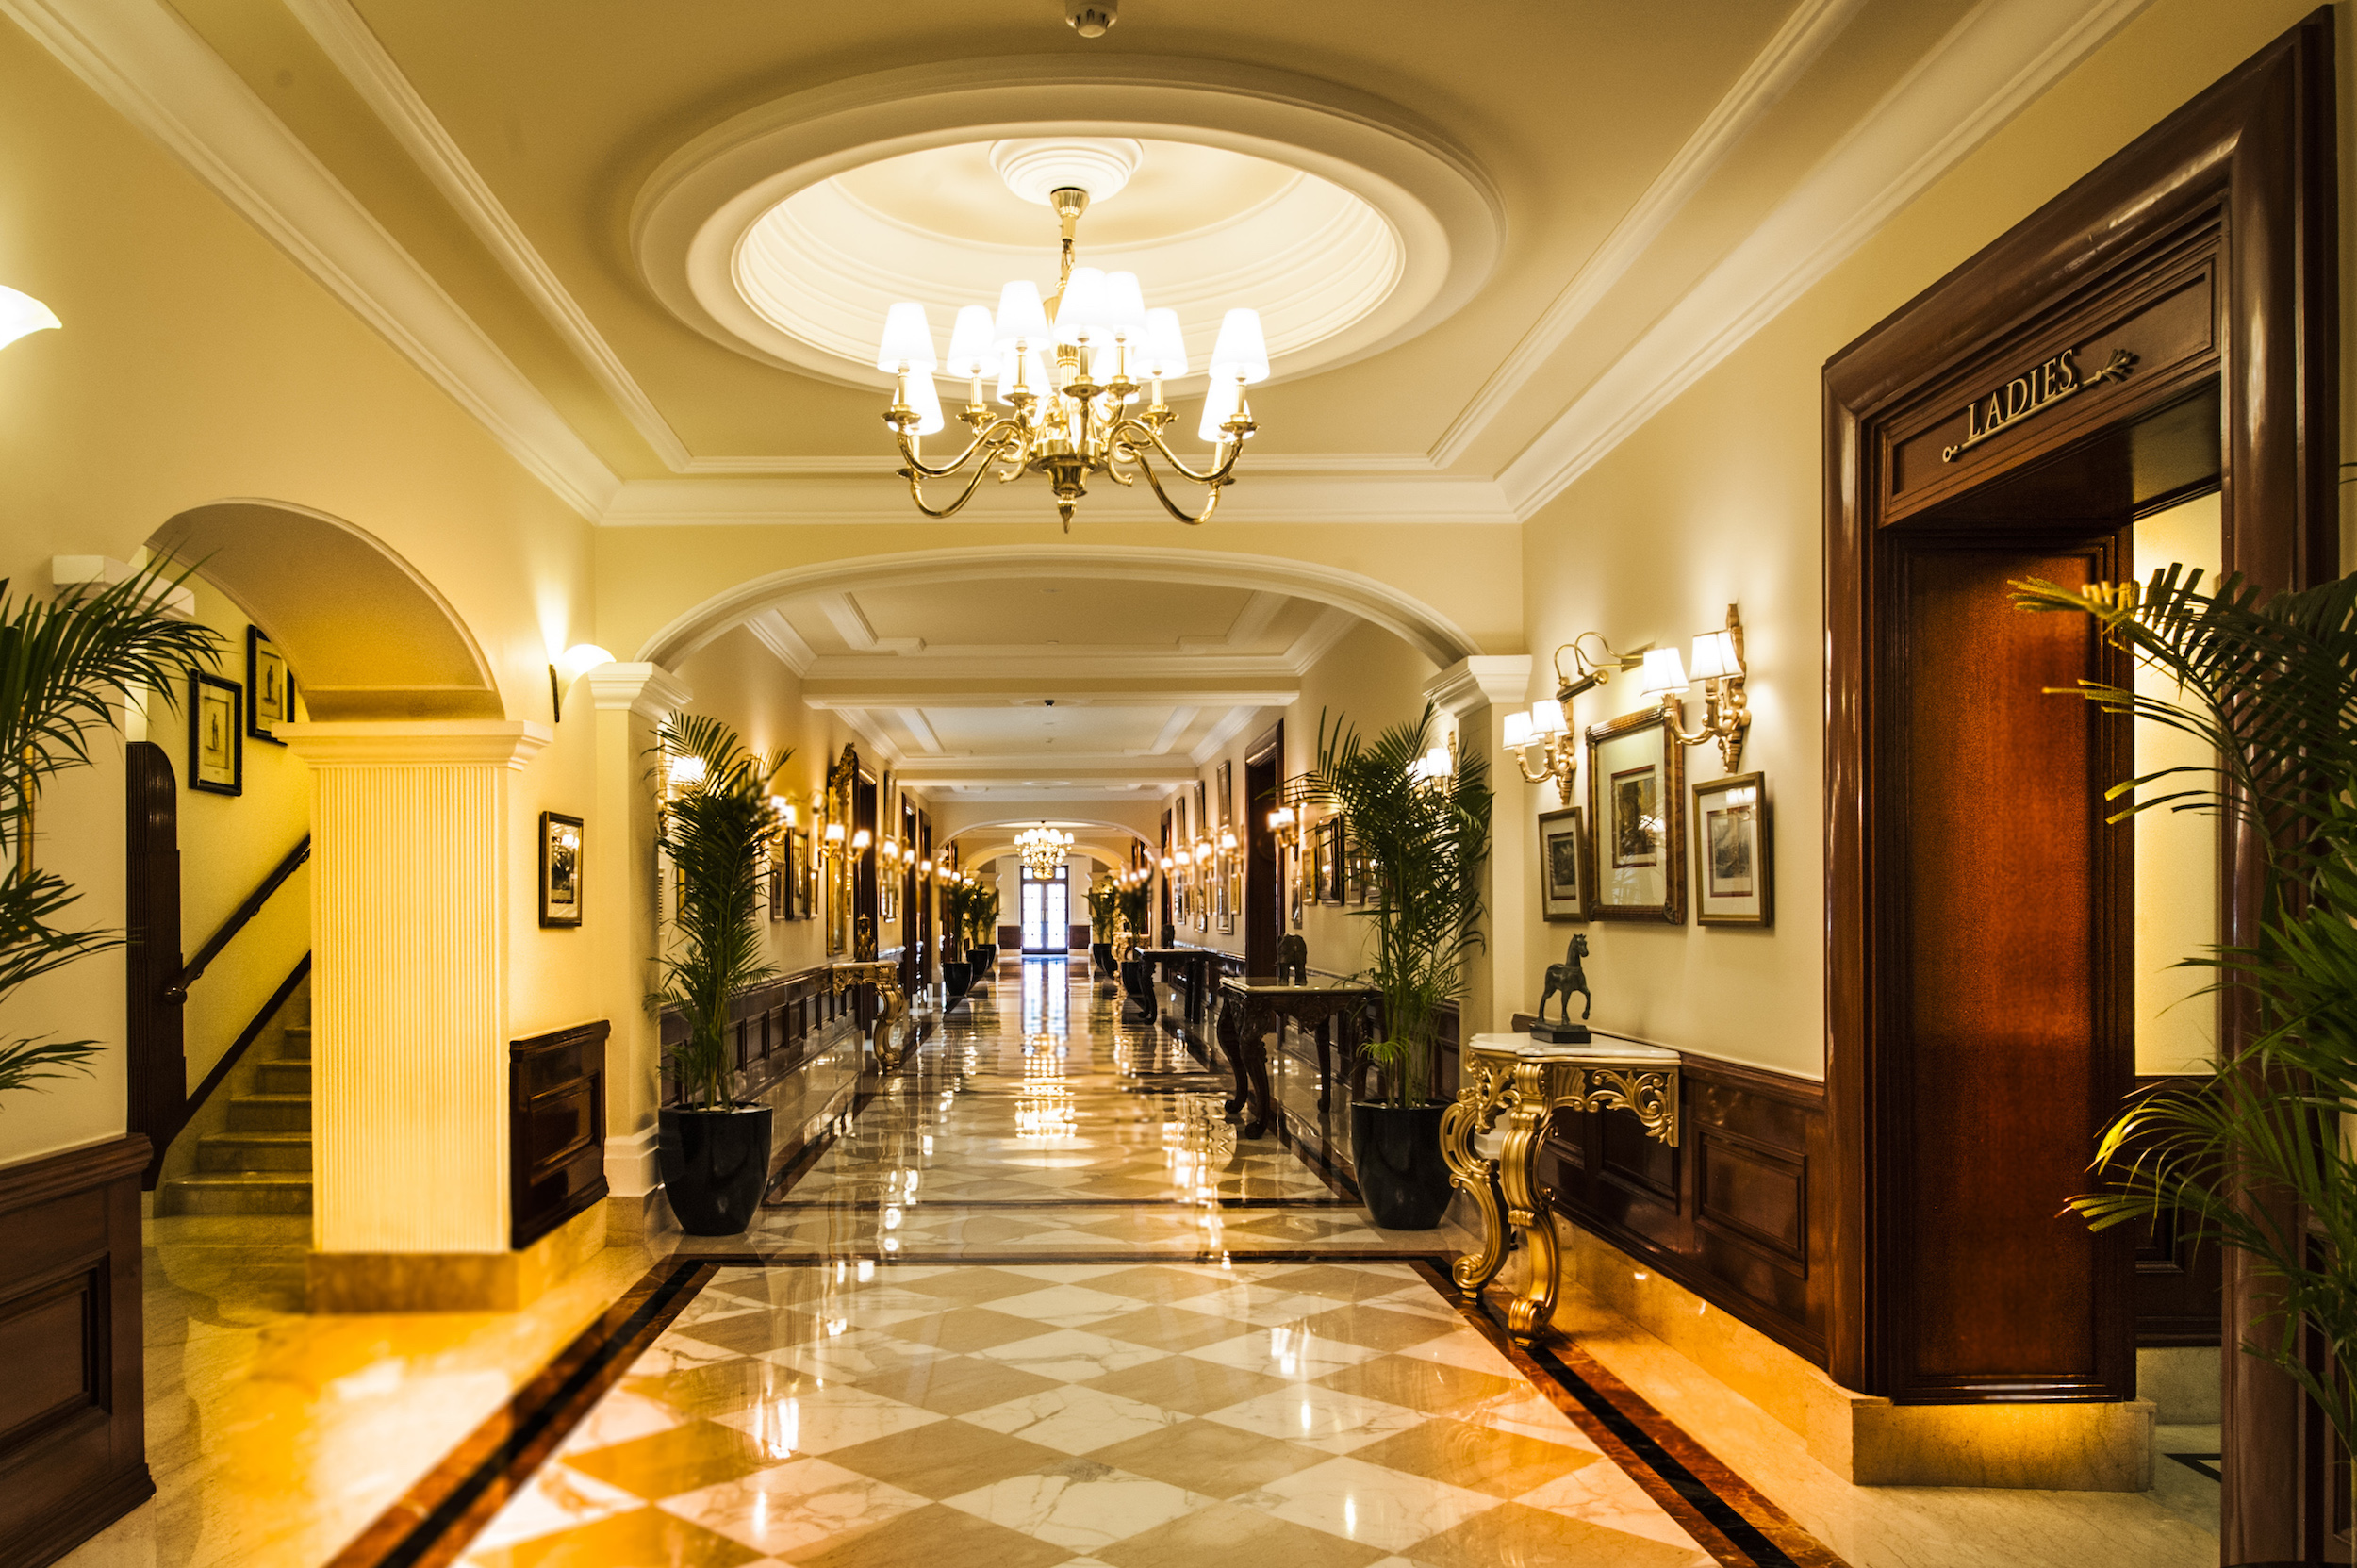 The Imperial: A History of Delhi's First Luxury Hotel